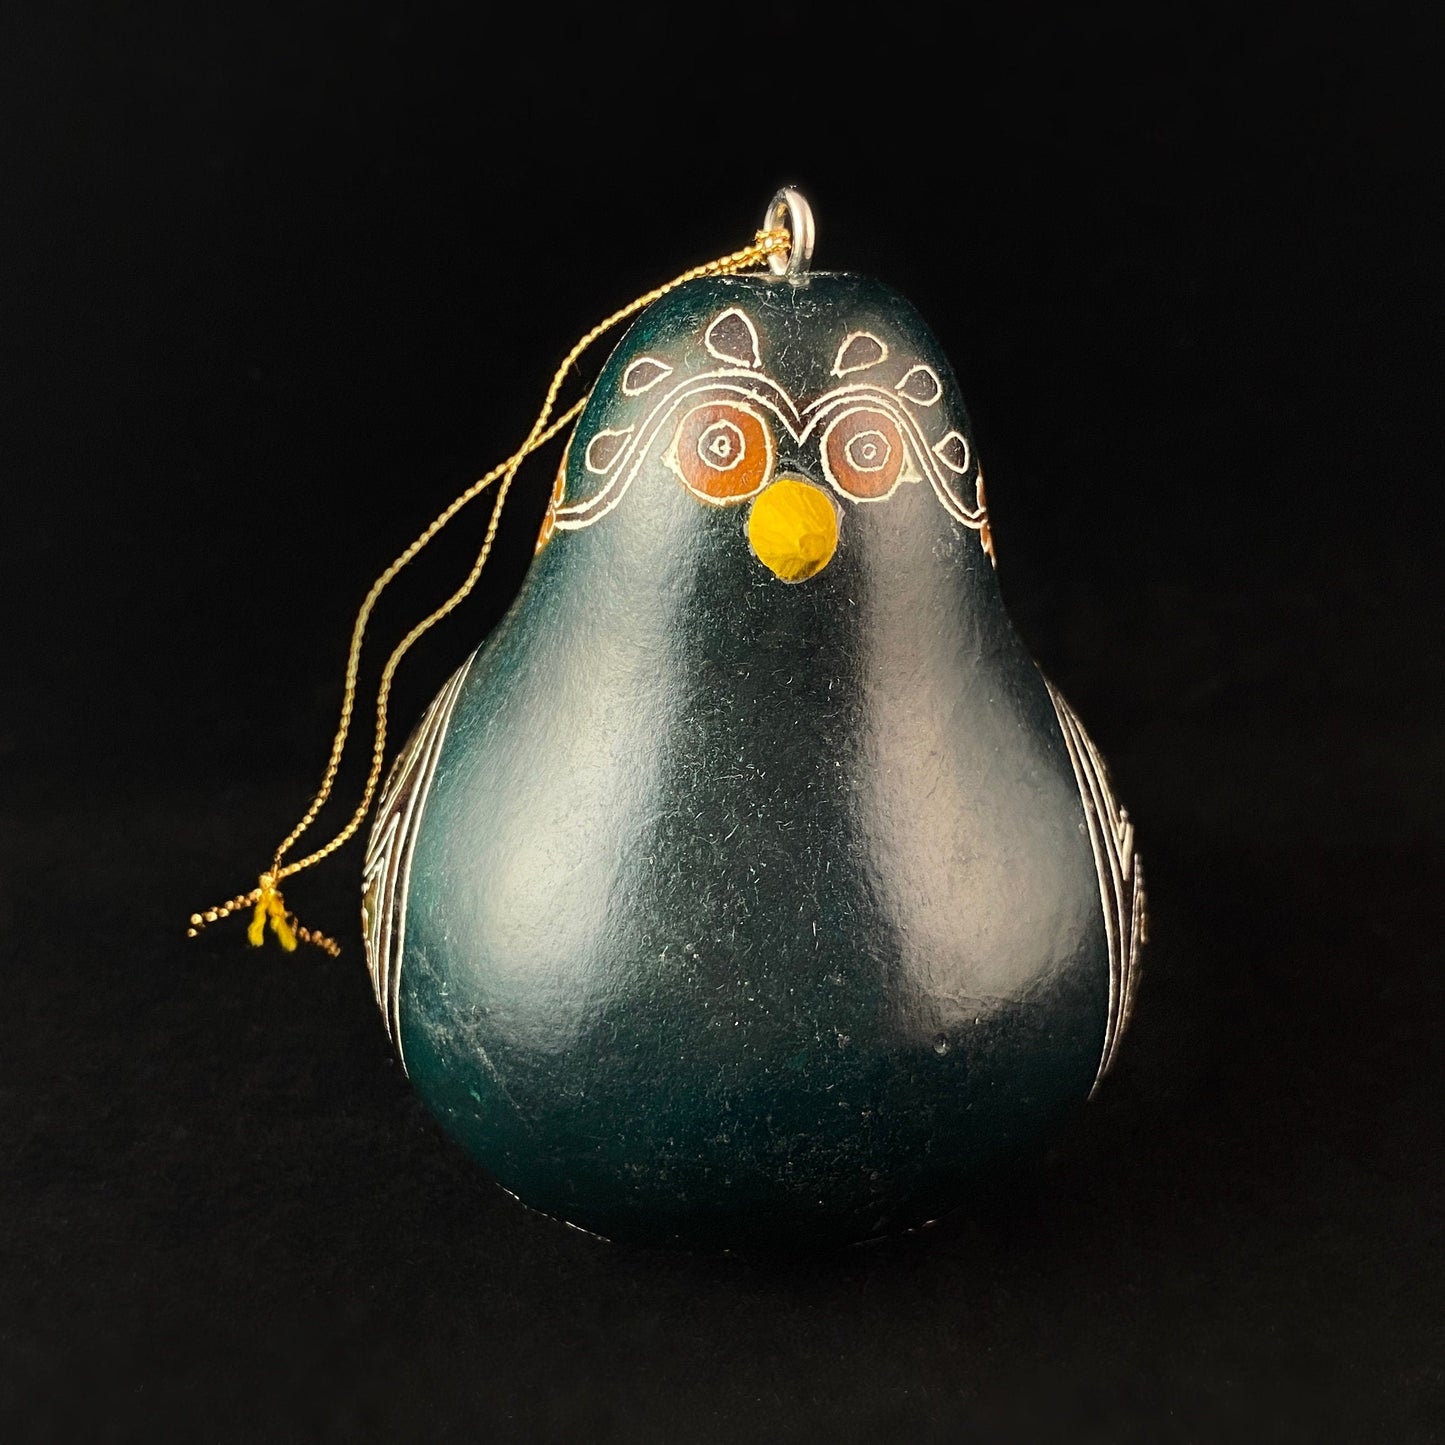 Decorative Green Bird Ornament/Maraca - Hand-Carved and Hand Painted Peruvian Gourd